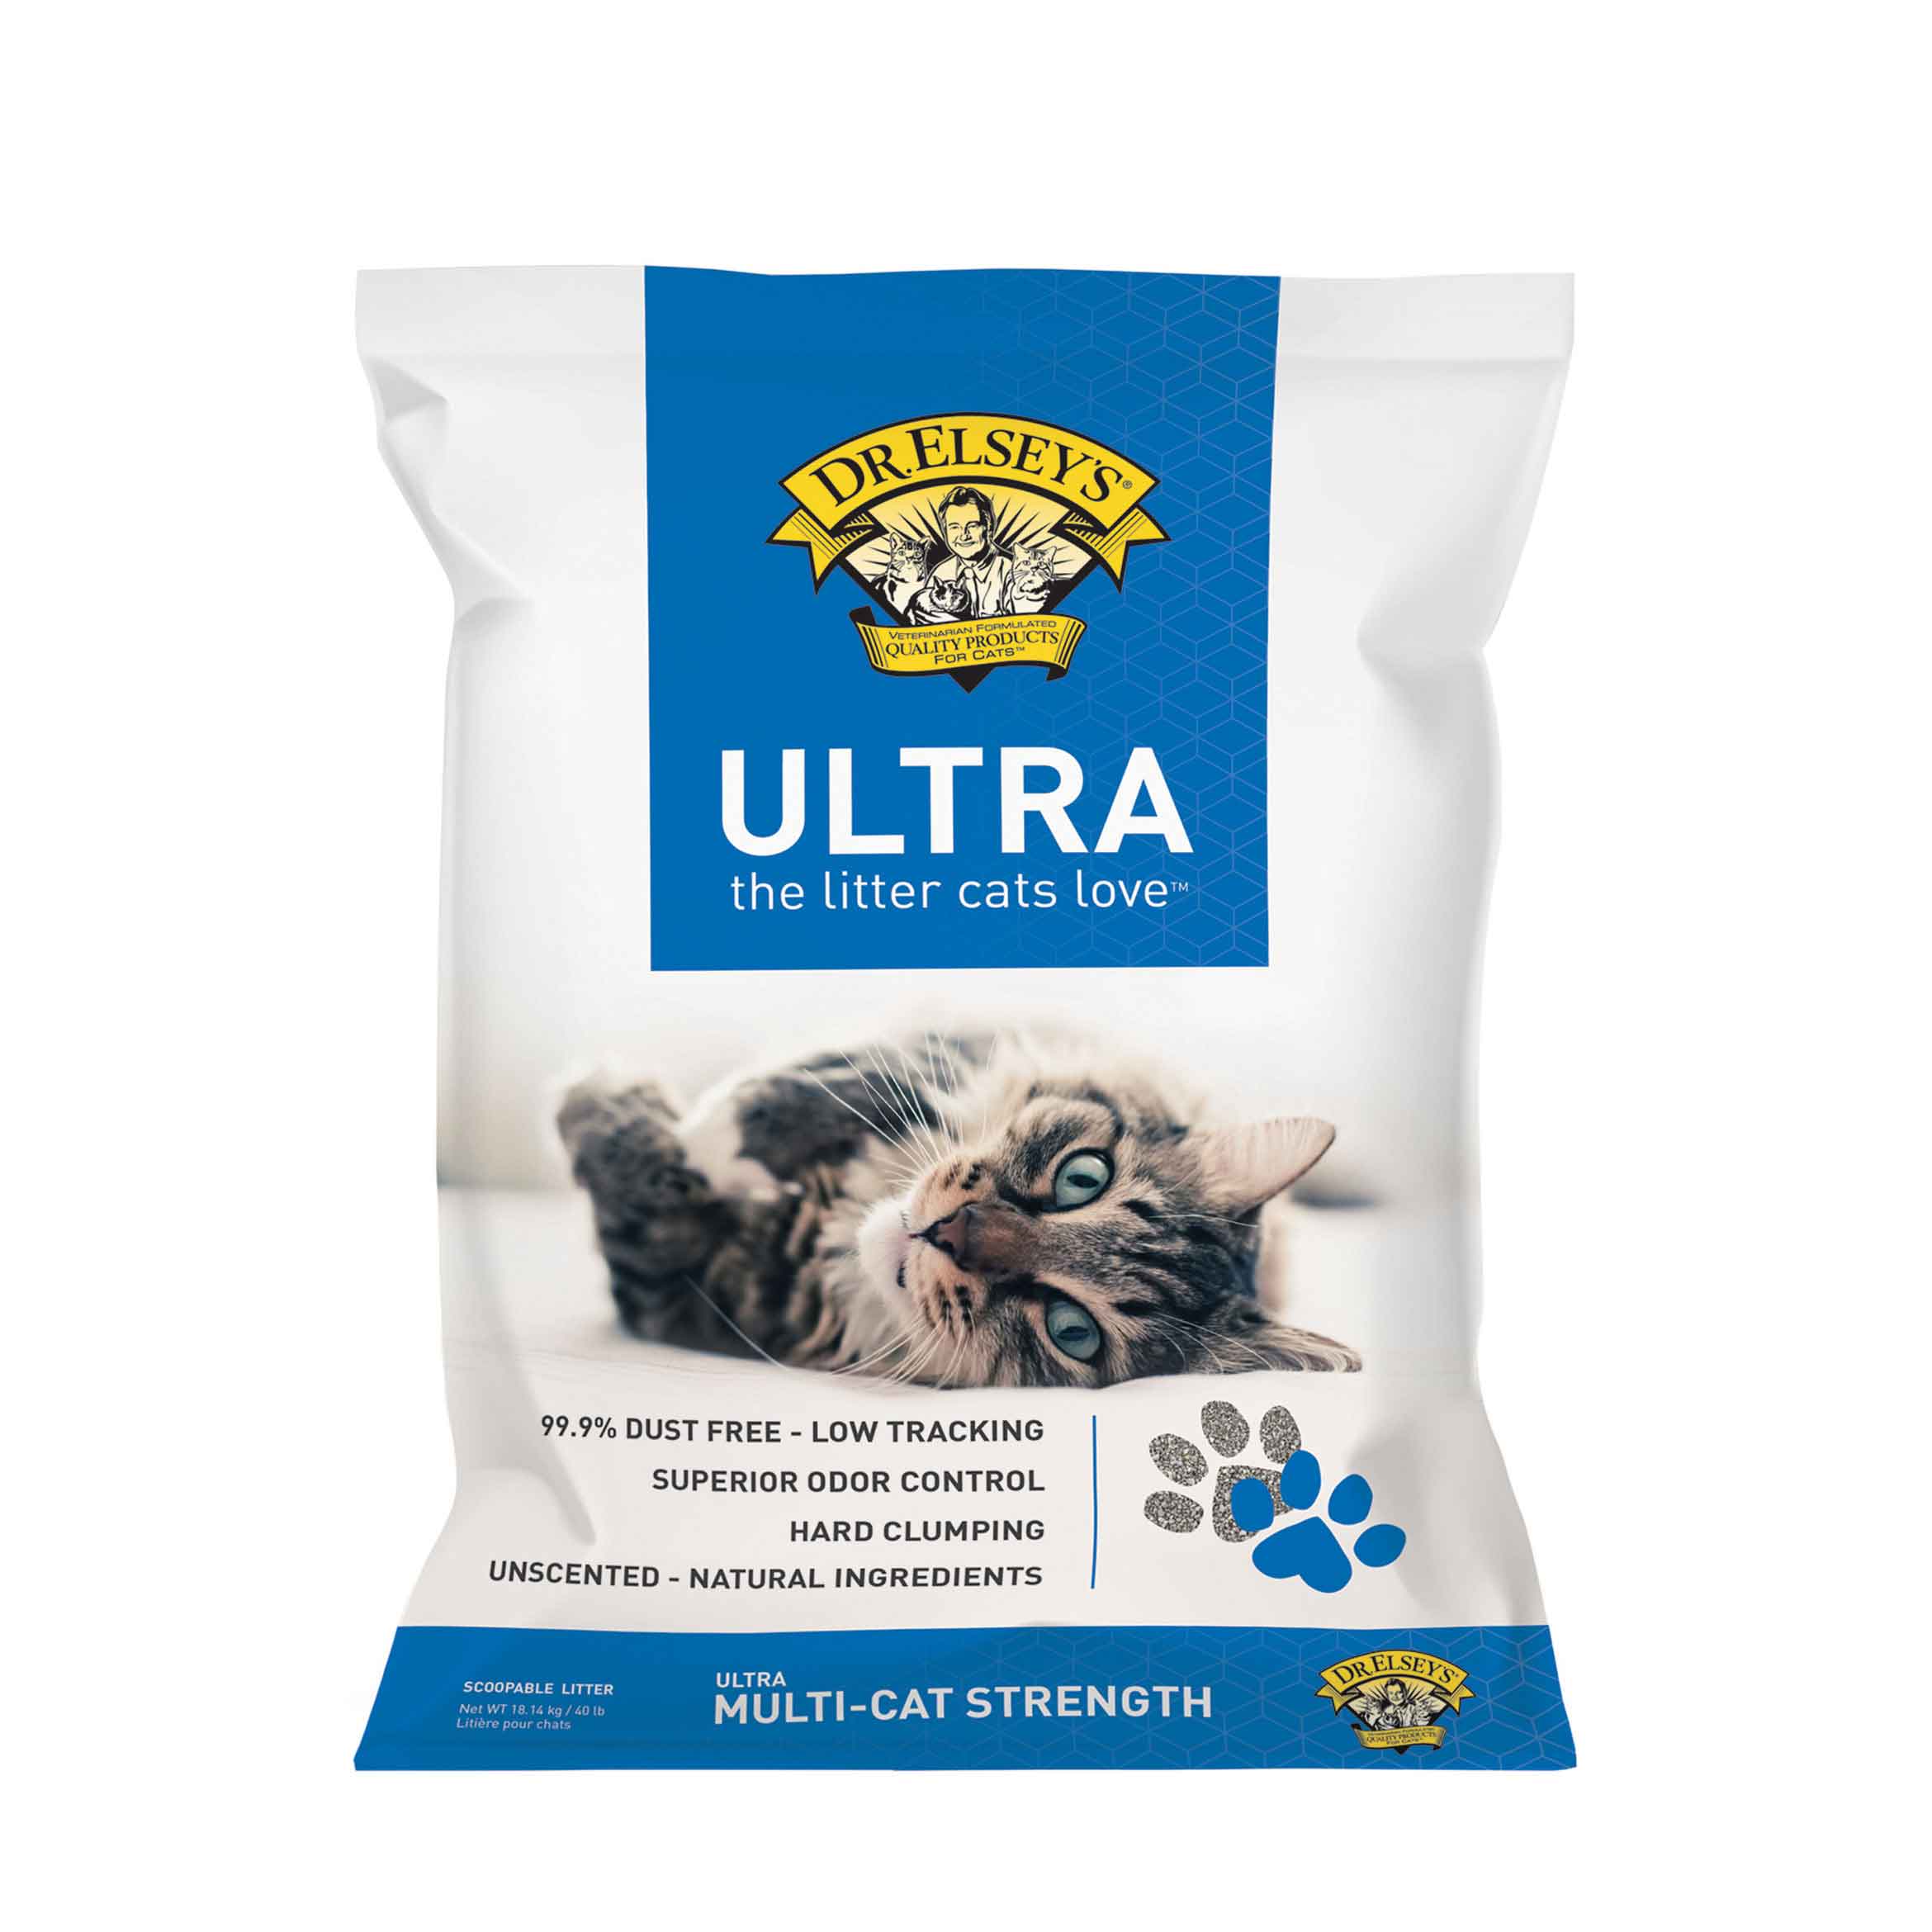 Dr Elsey's Ultra premium natural clay litter, 40 pound bag